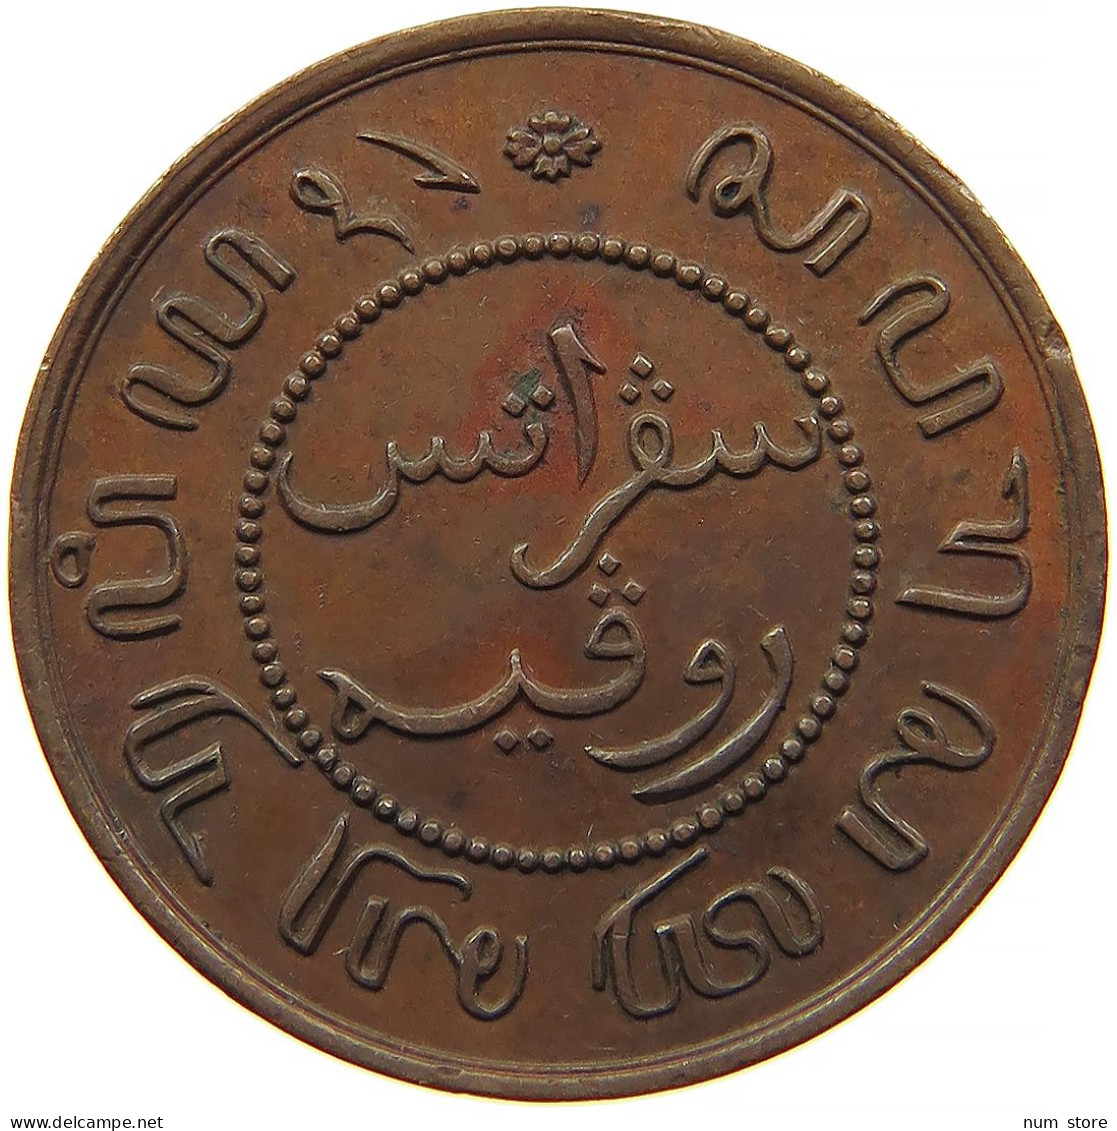 NETHERLANDS EAST INDIES CENT 1855 Willem III. 1849-1890 SHINNY FIELD, EDGE DAMAGES, PROOF EXAMPLE #t028 0441 - 1849-1890 : Willem III